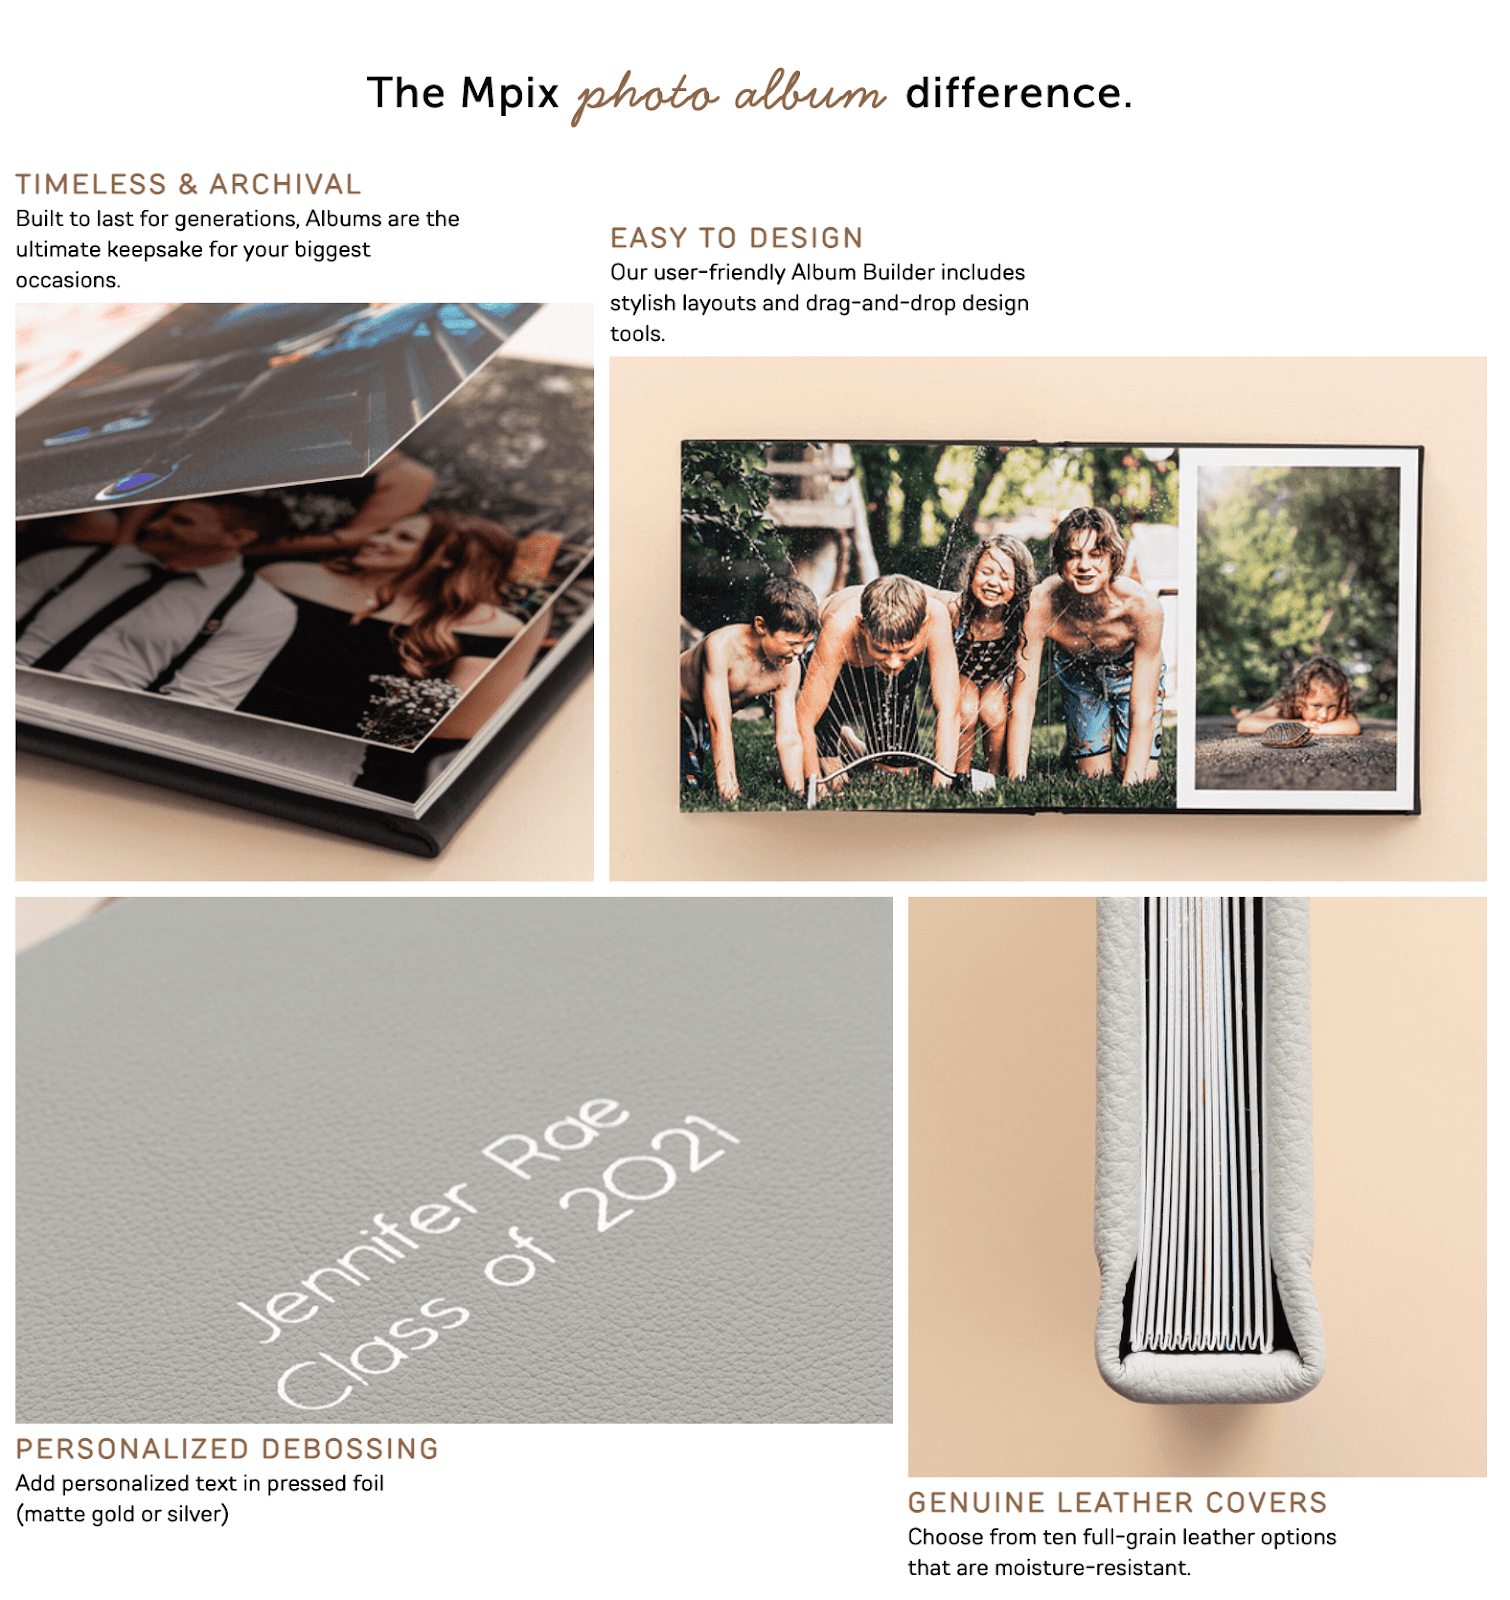 Valentine’s Day Gift Guide–A screenshot from MPix’s photo album product page showing 4 images of their photo albums and text that reads “The MPix photo album difference”.